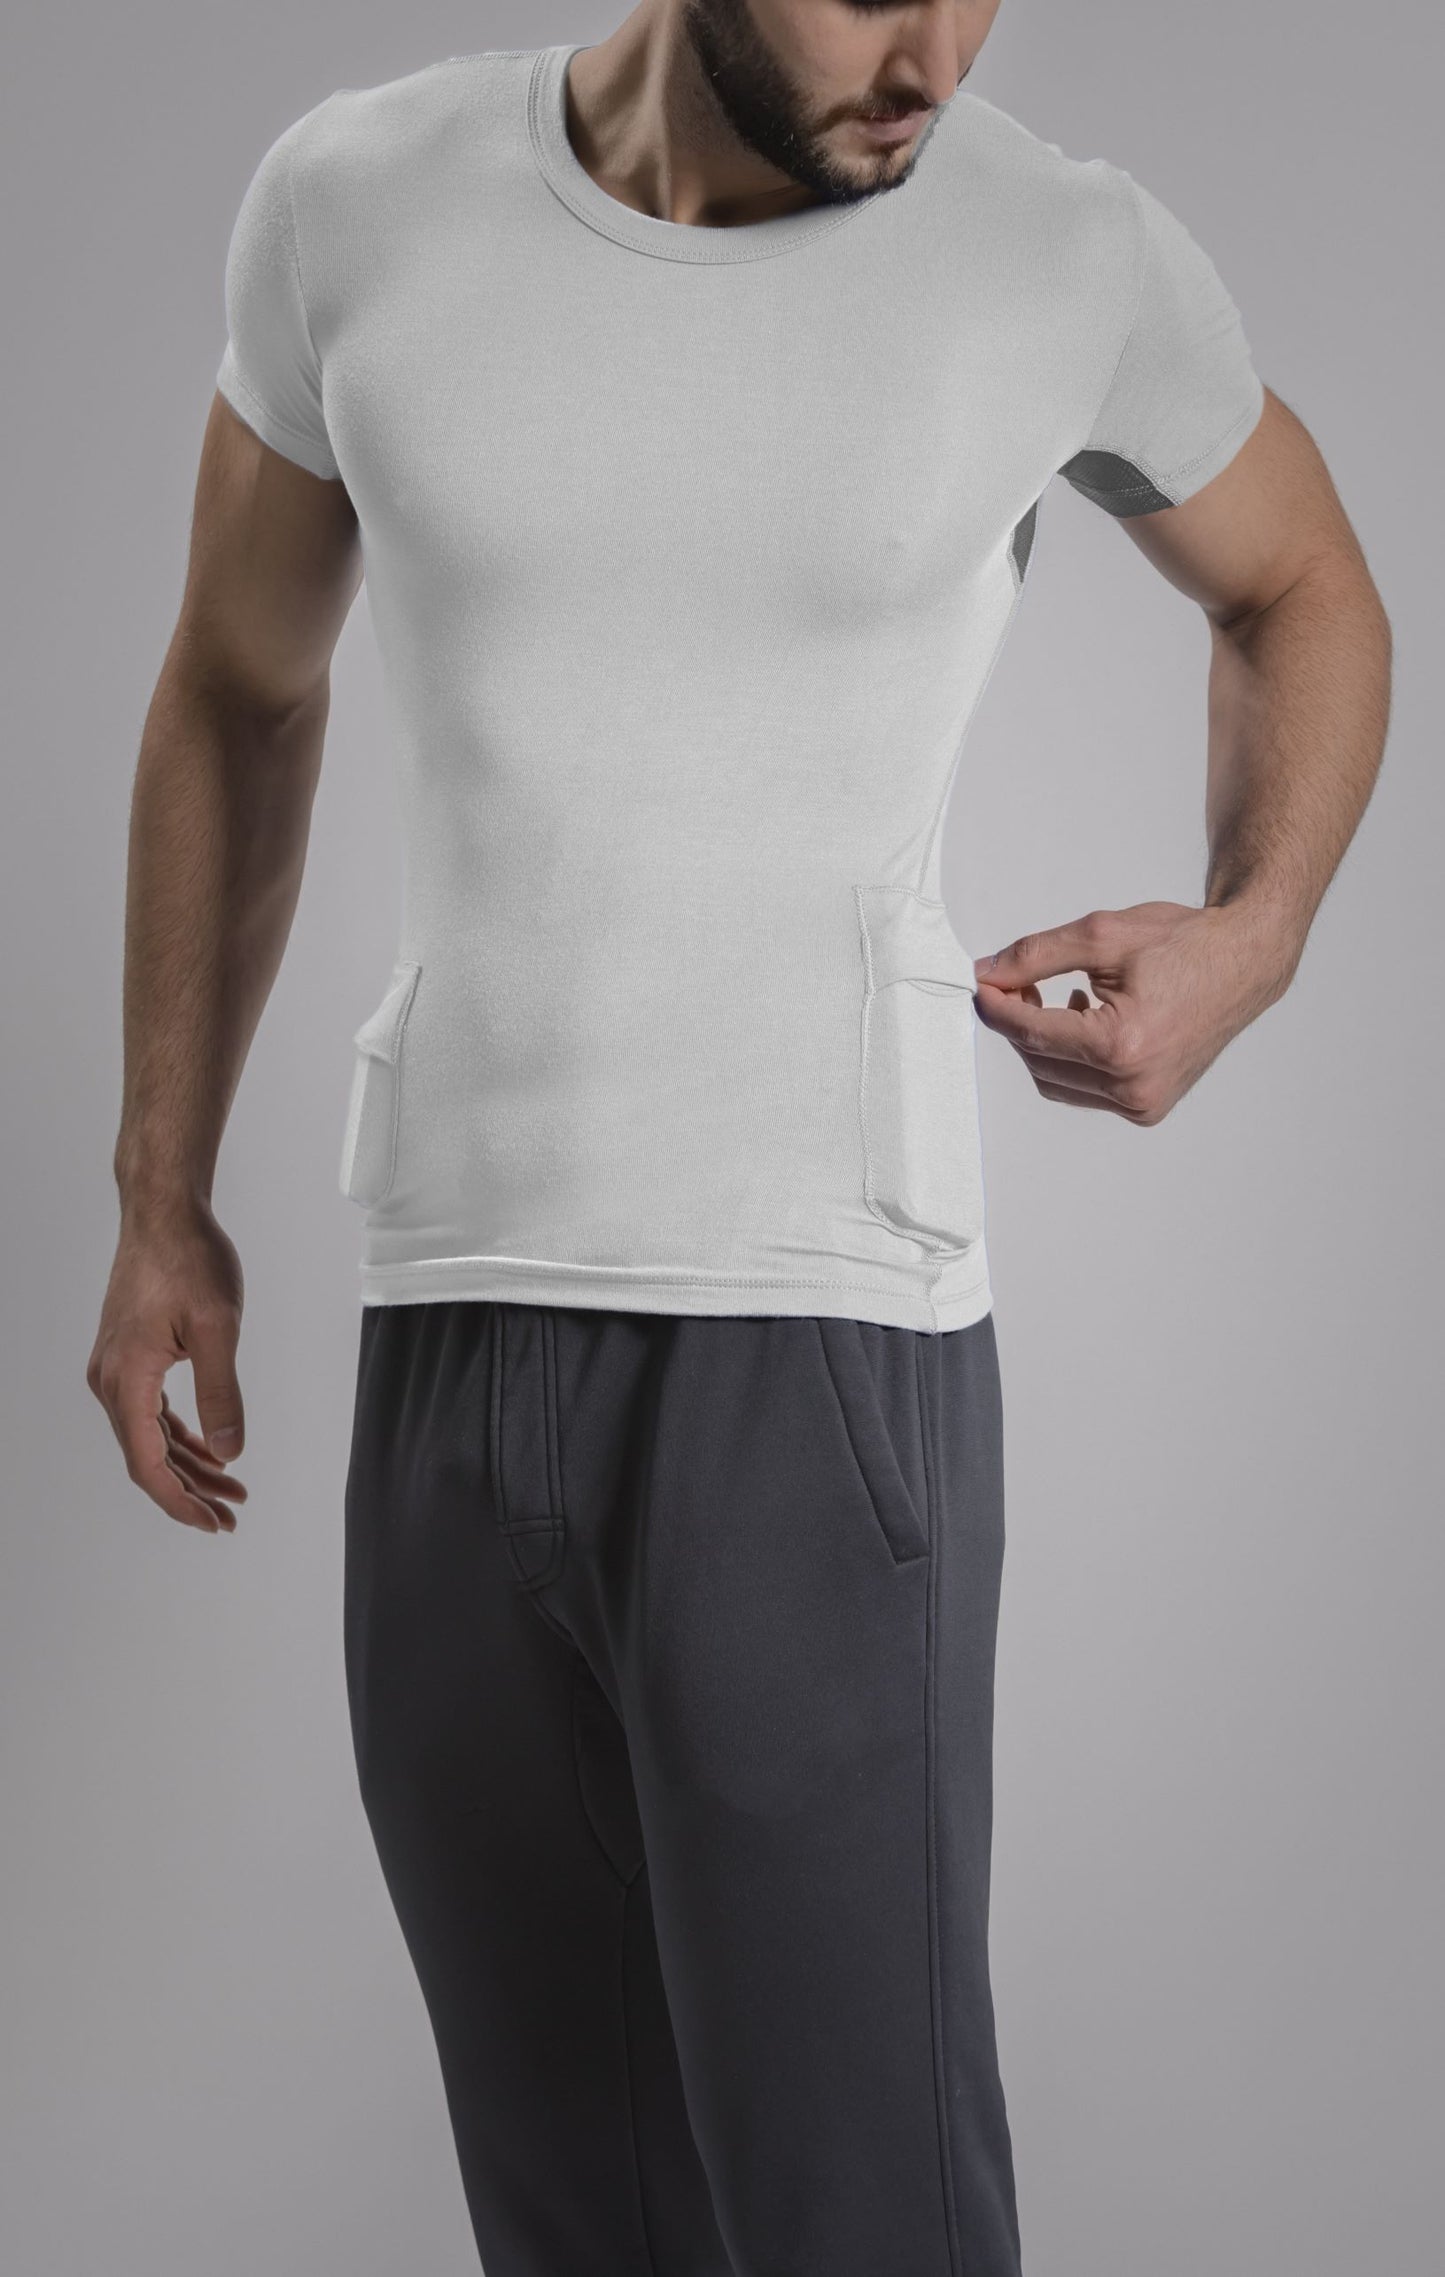 Men's Loungewear Crew Neck Tee with Insulin Pump and Cell Phone Pockets